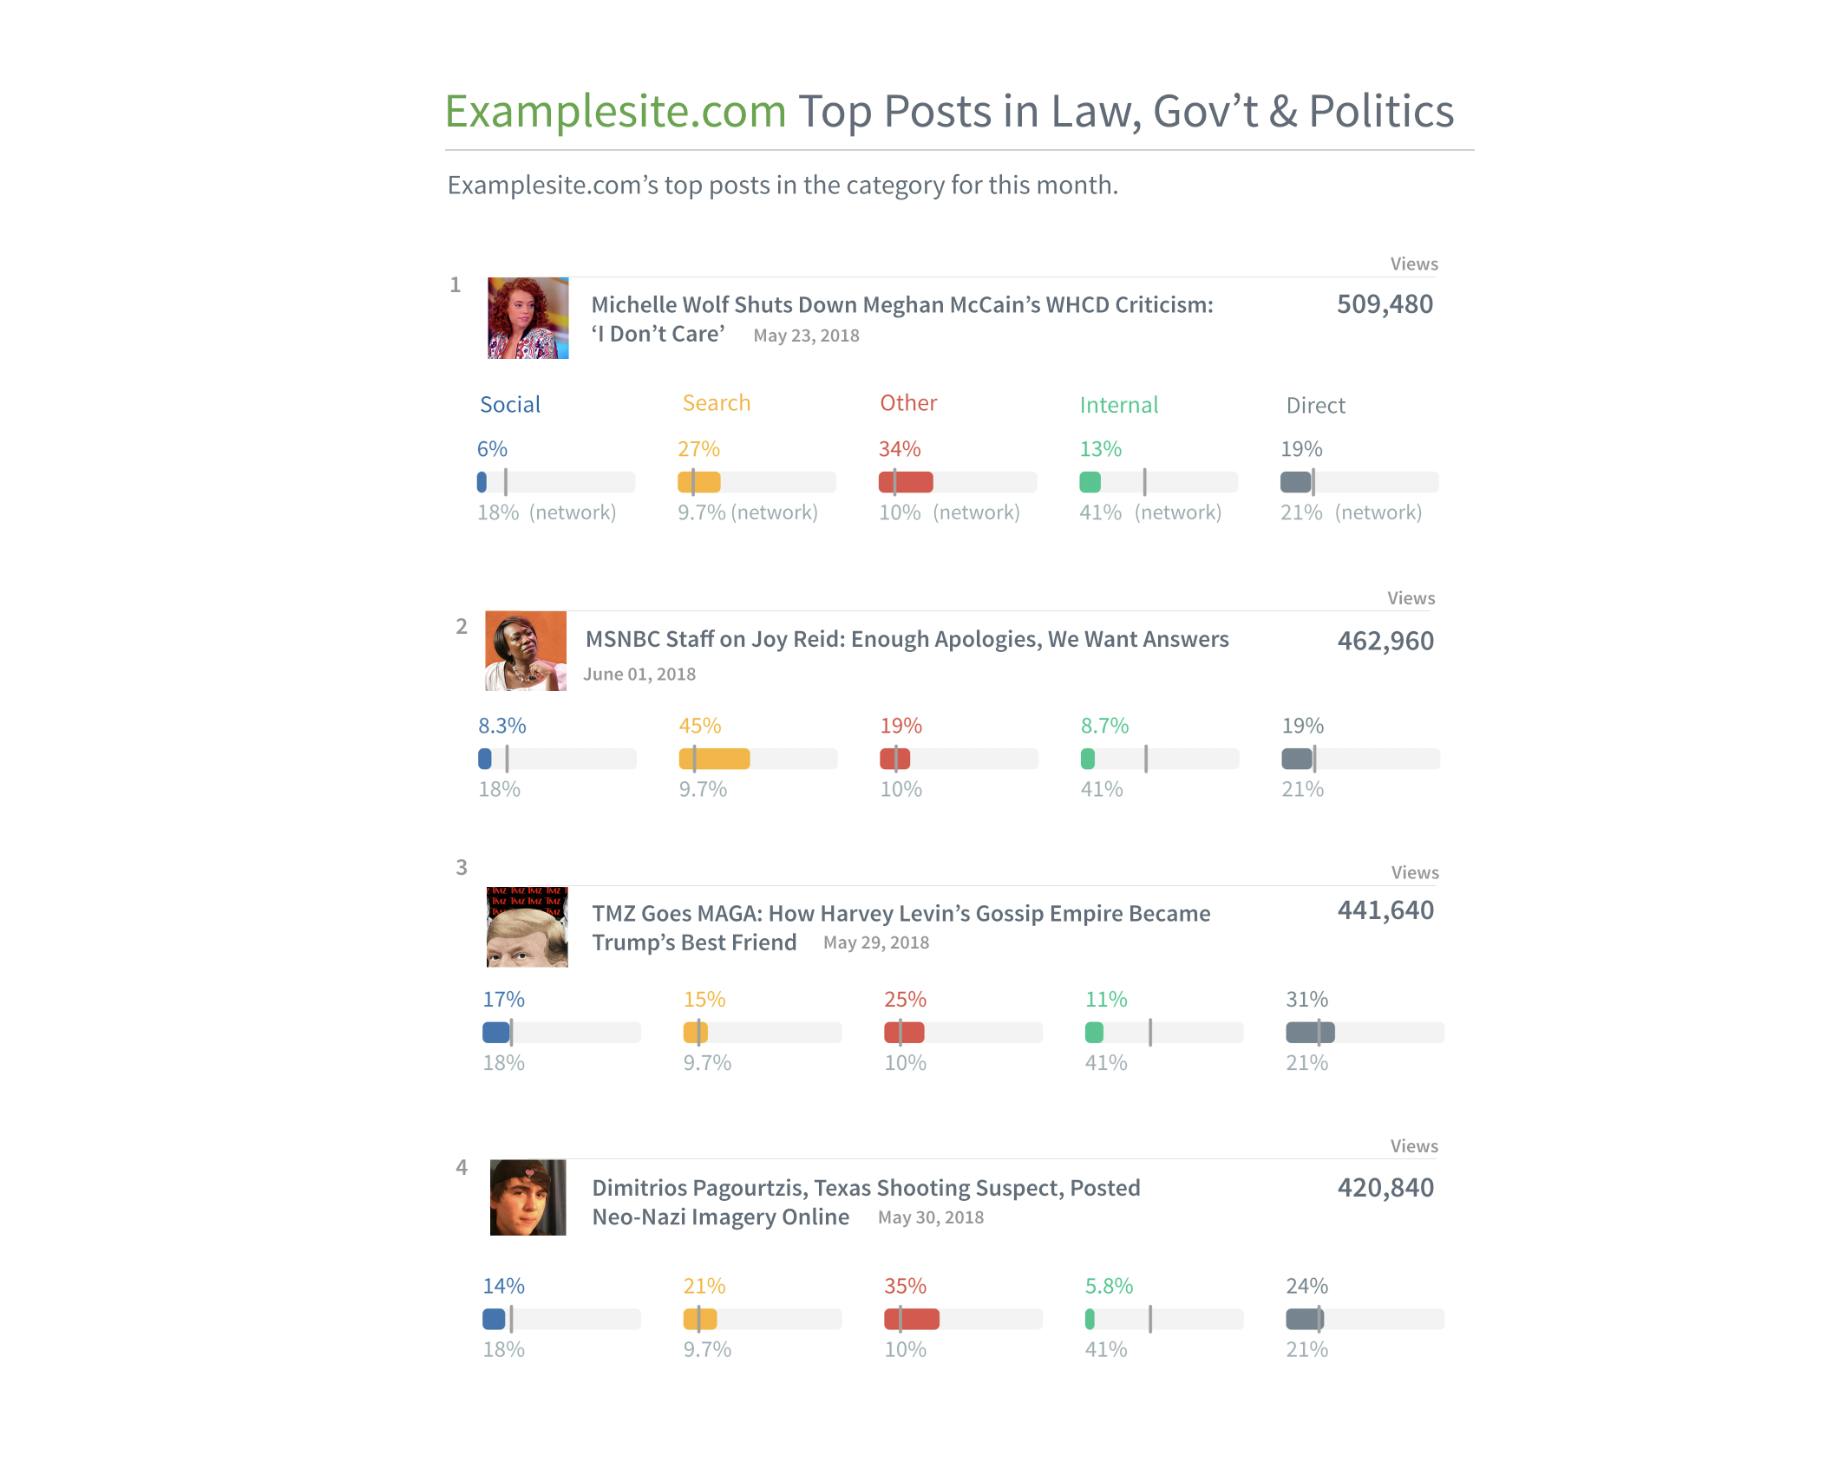 View top posts and their source breakdown.